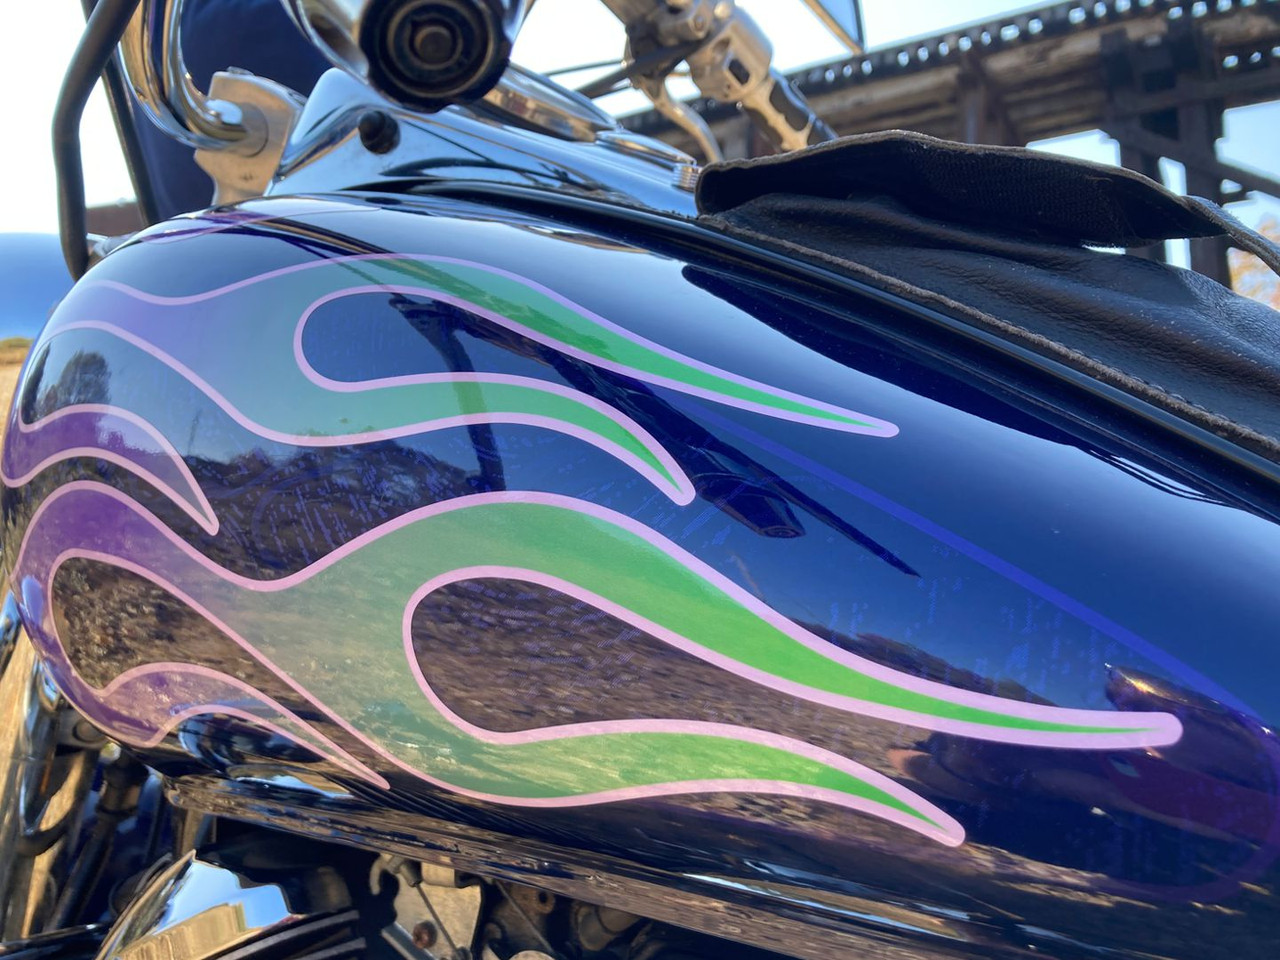 Detailed View of Motorcycle Flame Decals